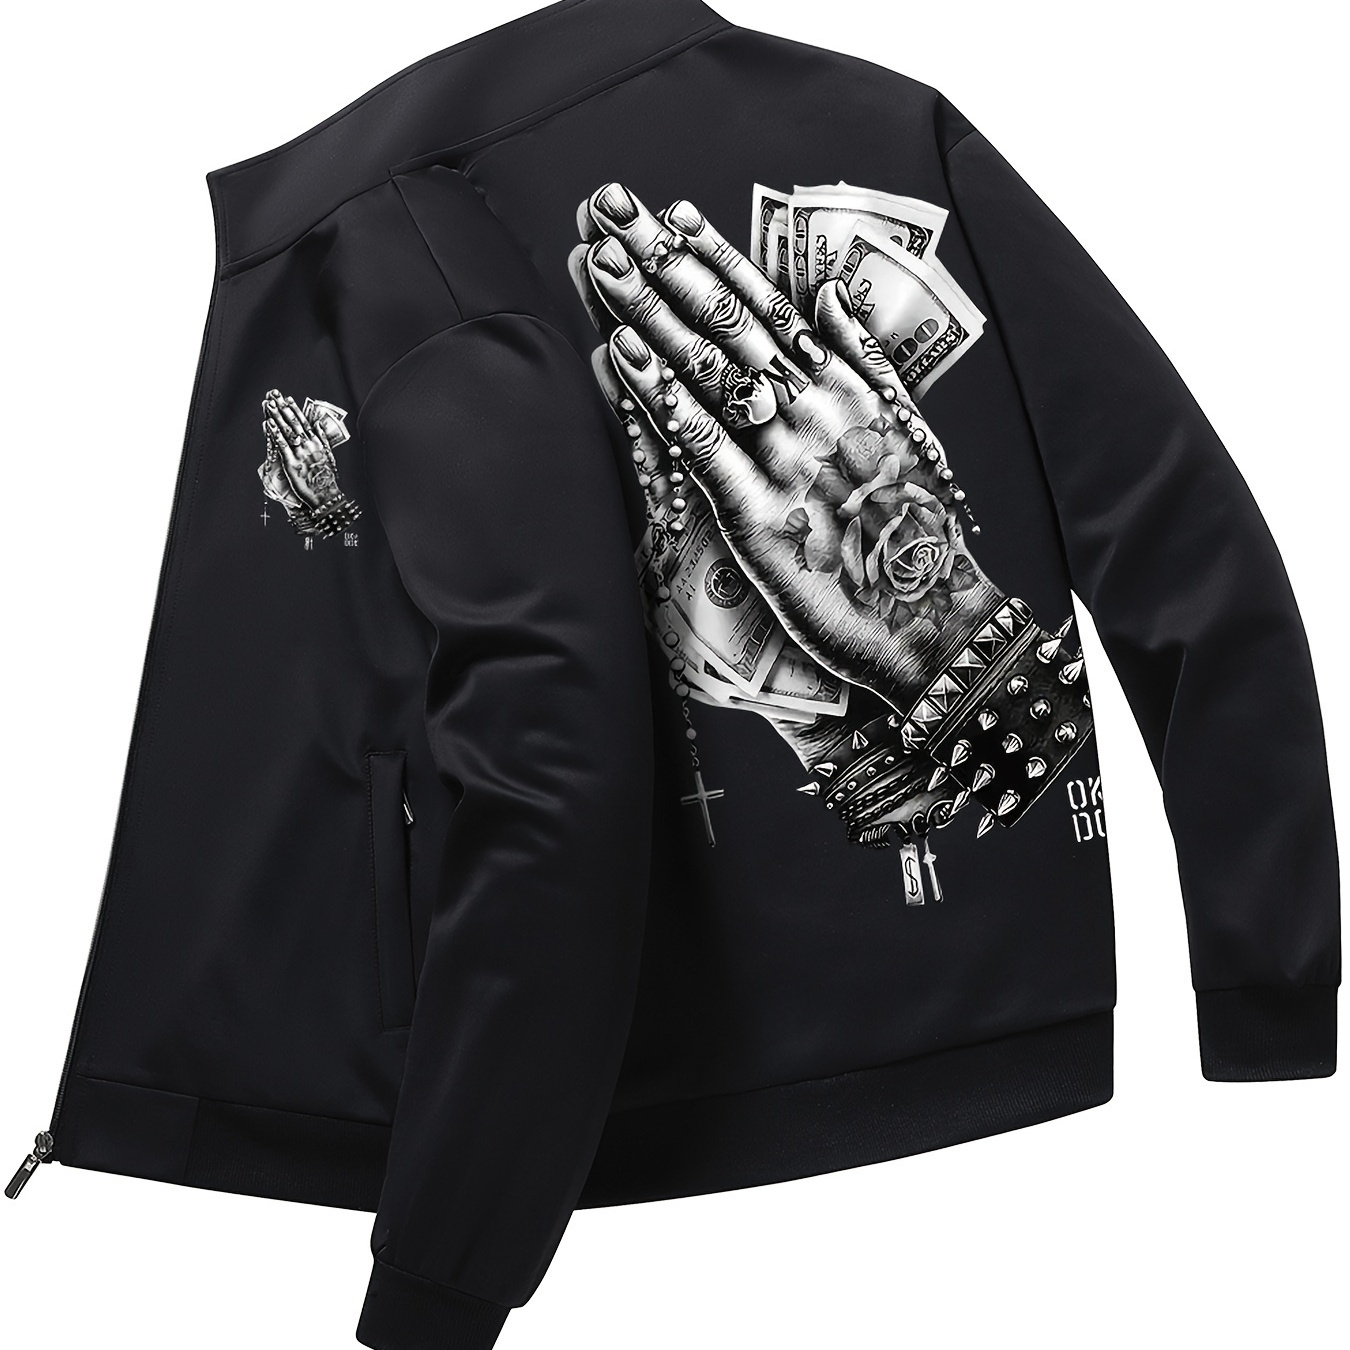 

Men's Casual Praying For Money Print Bomber Jacket, Zip Up Thin Jacket For Spring Summer